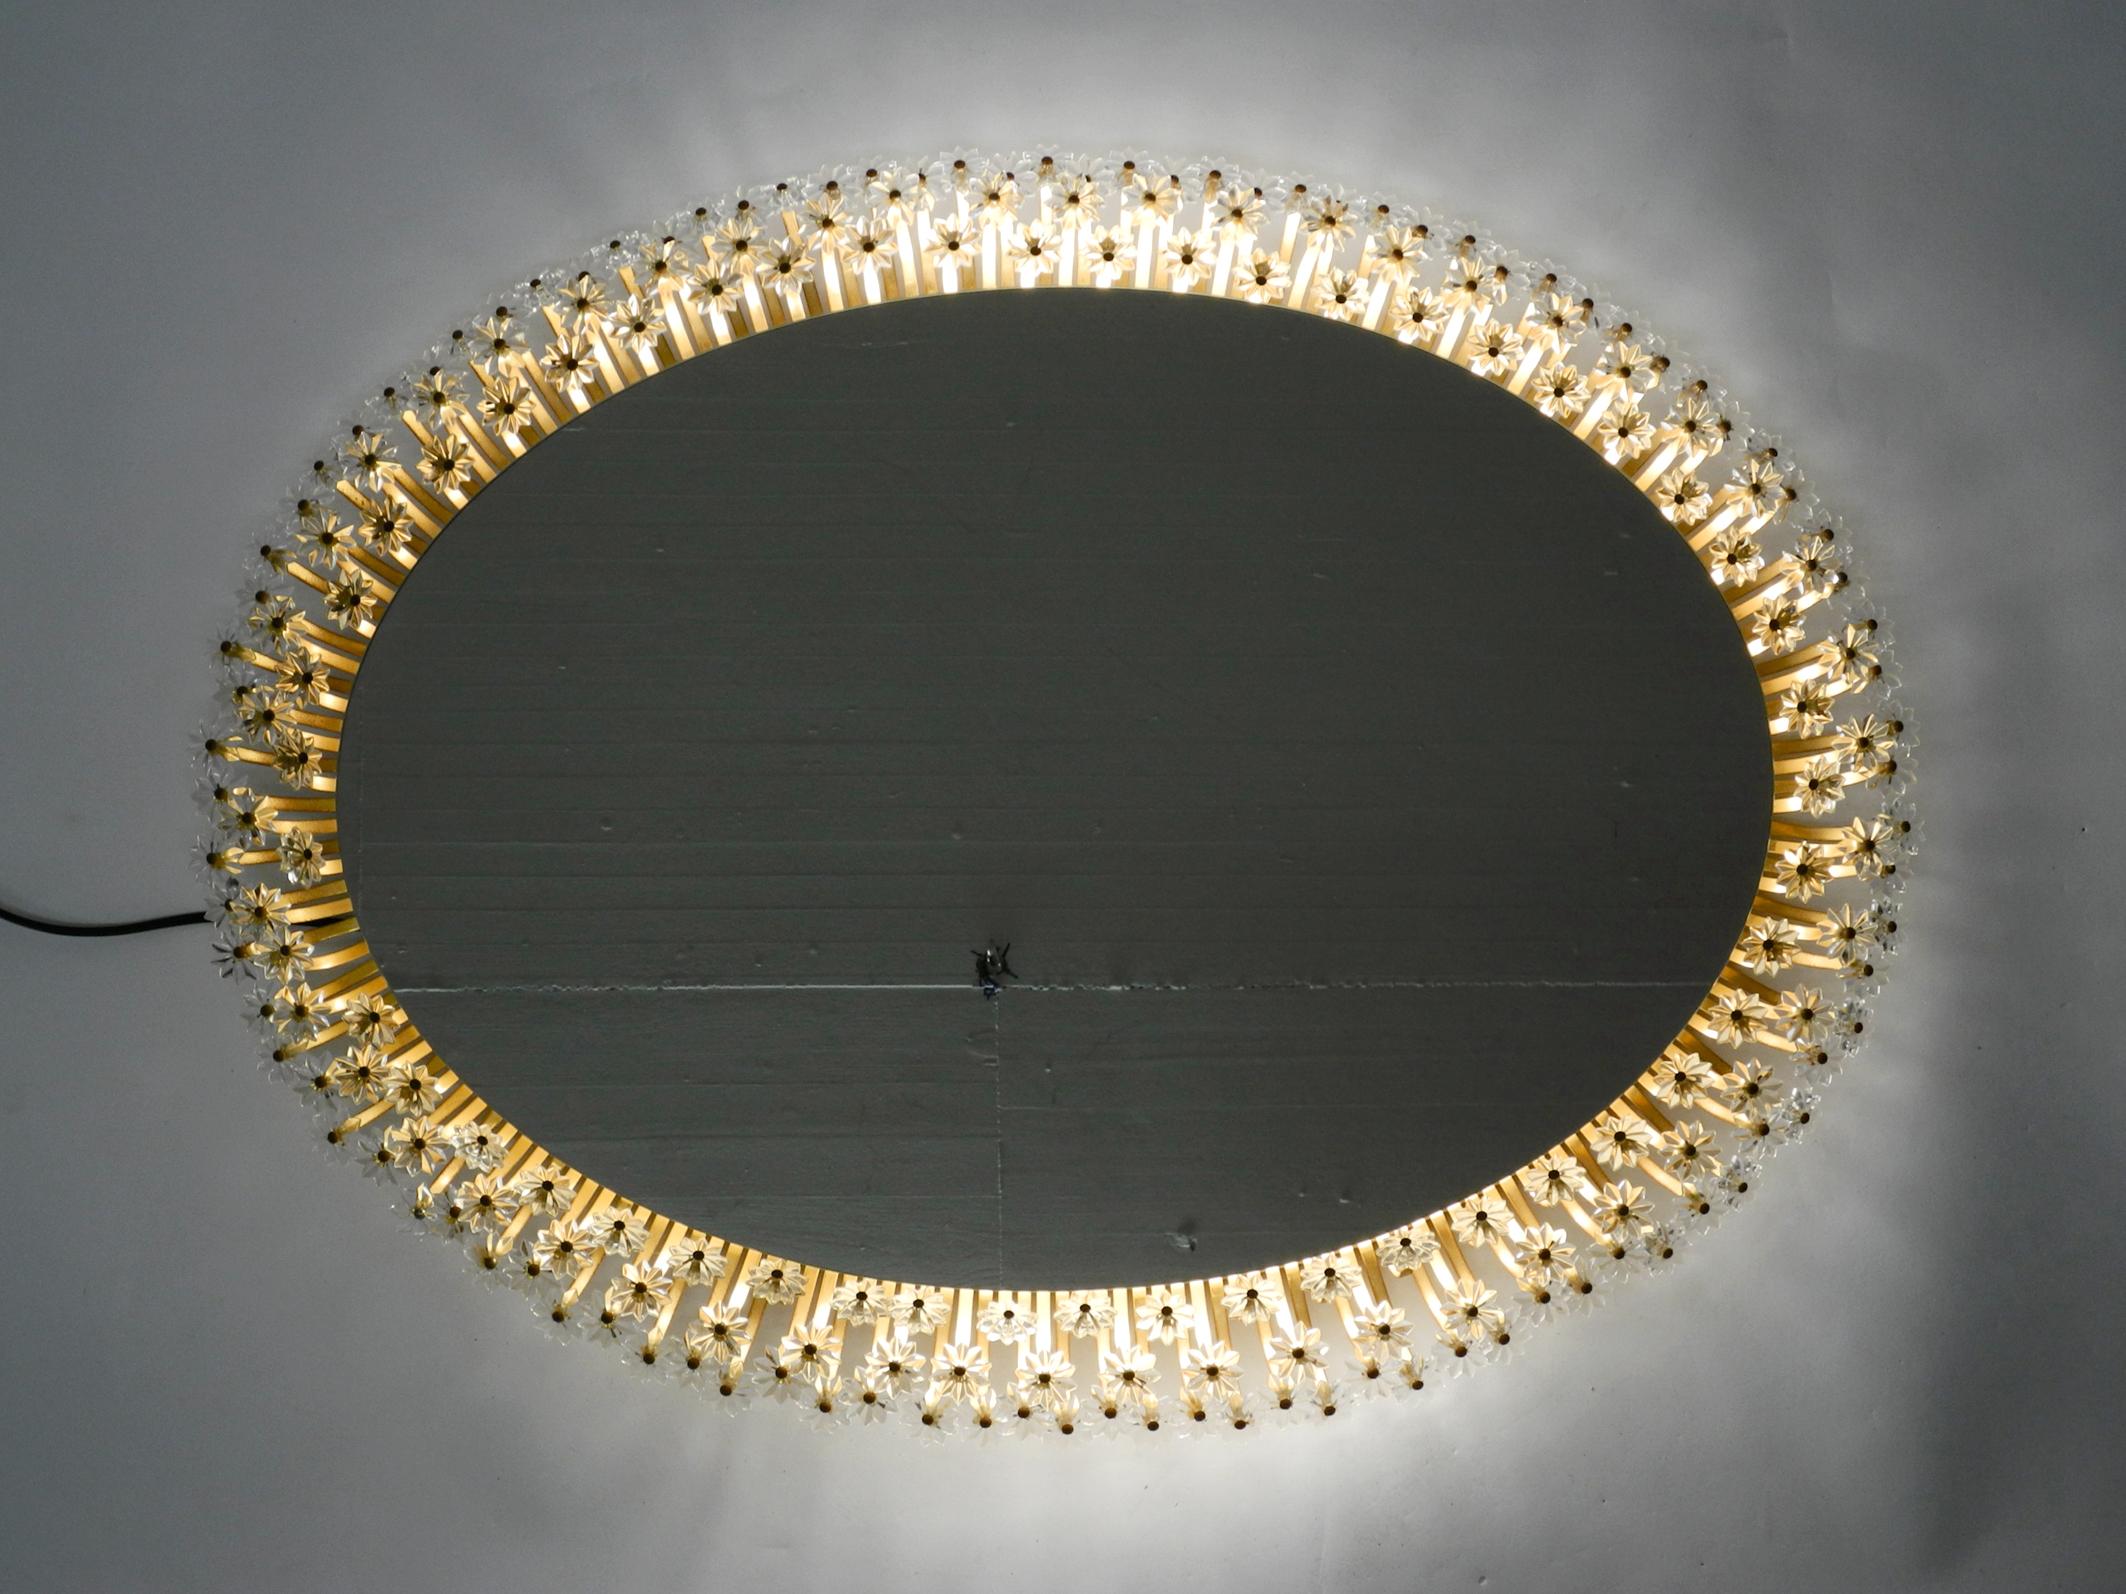 Large Oval 50s Illuminated Flower Mirror by Schöninger with a Gold-Colored Frame 7